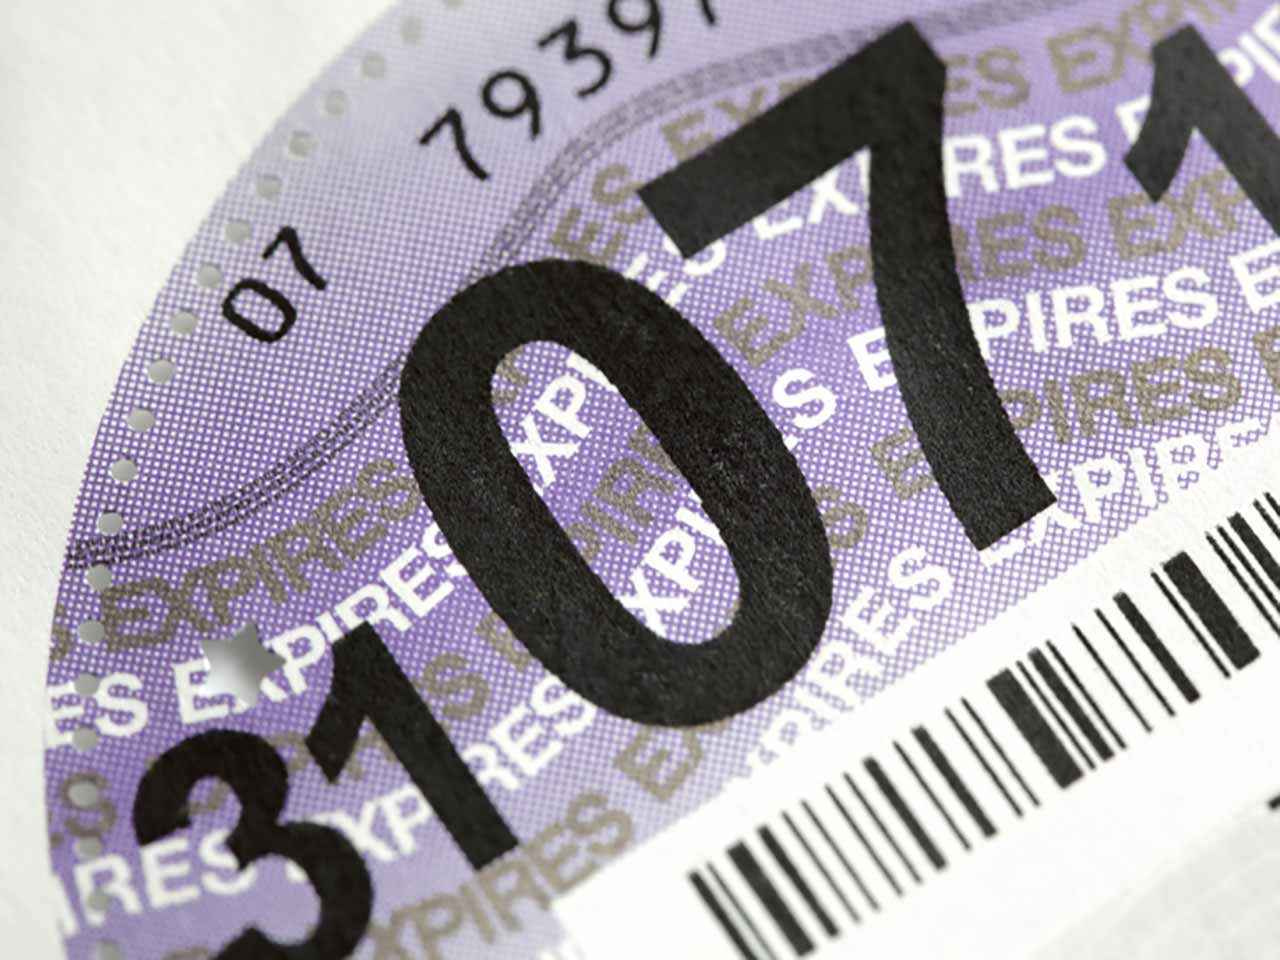 Old style car tax disc